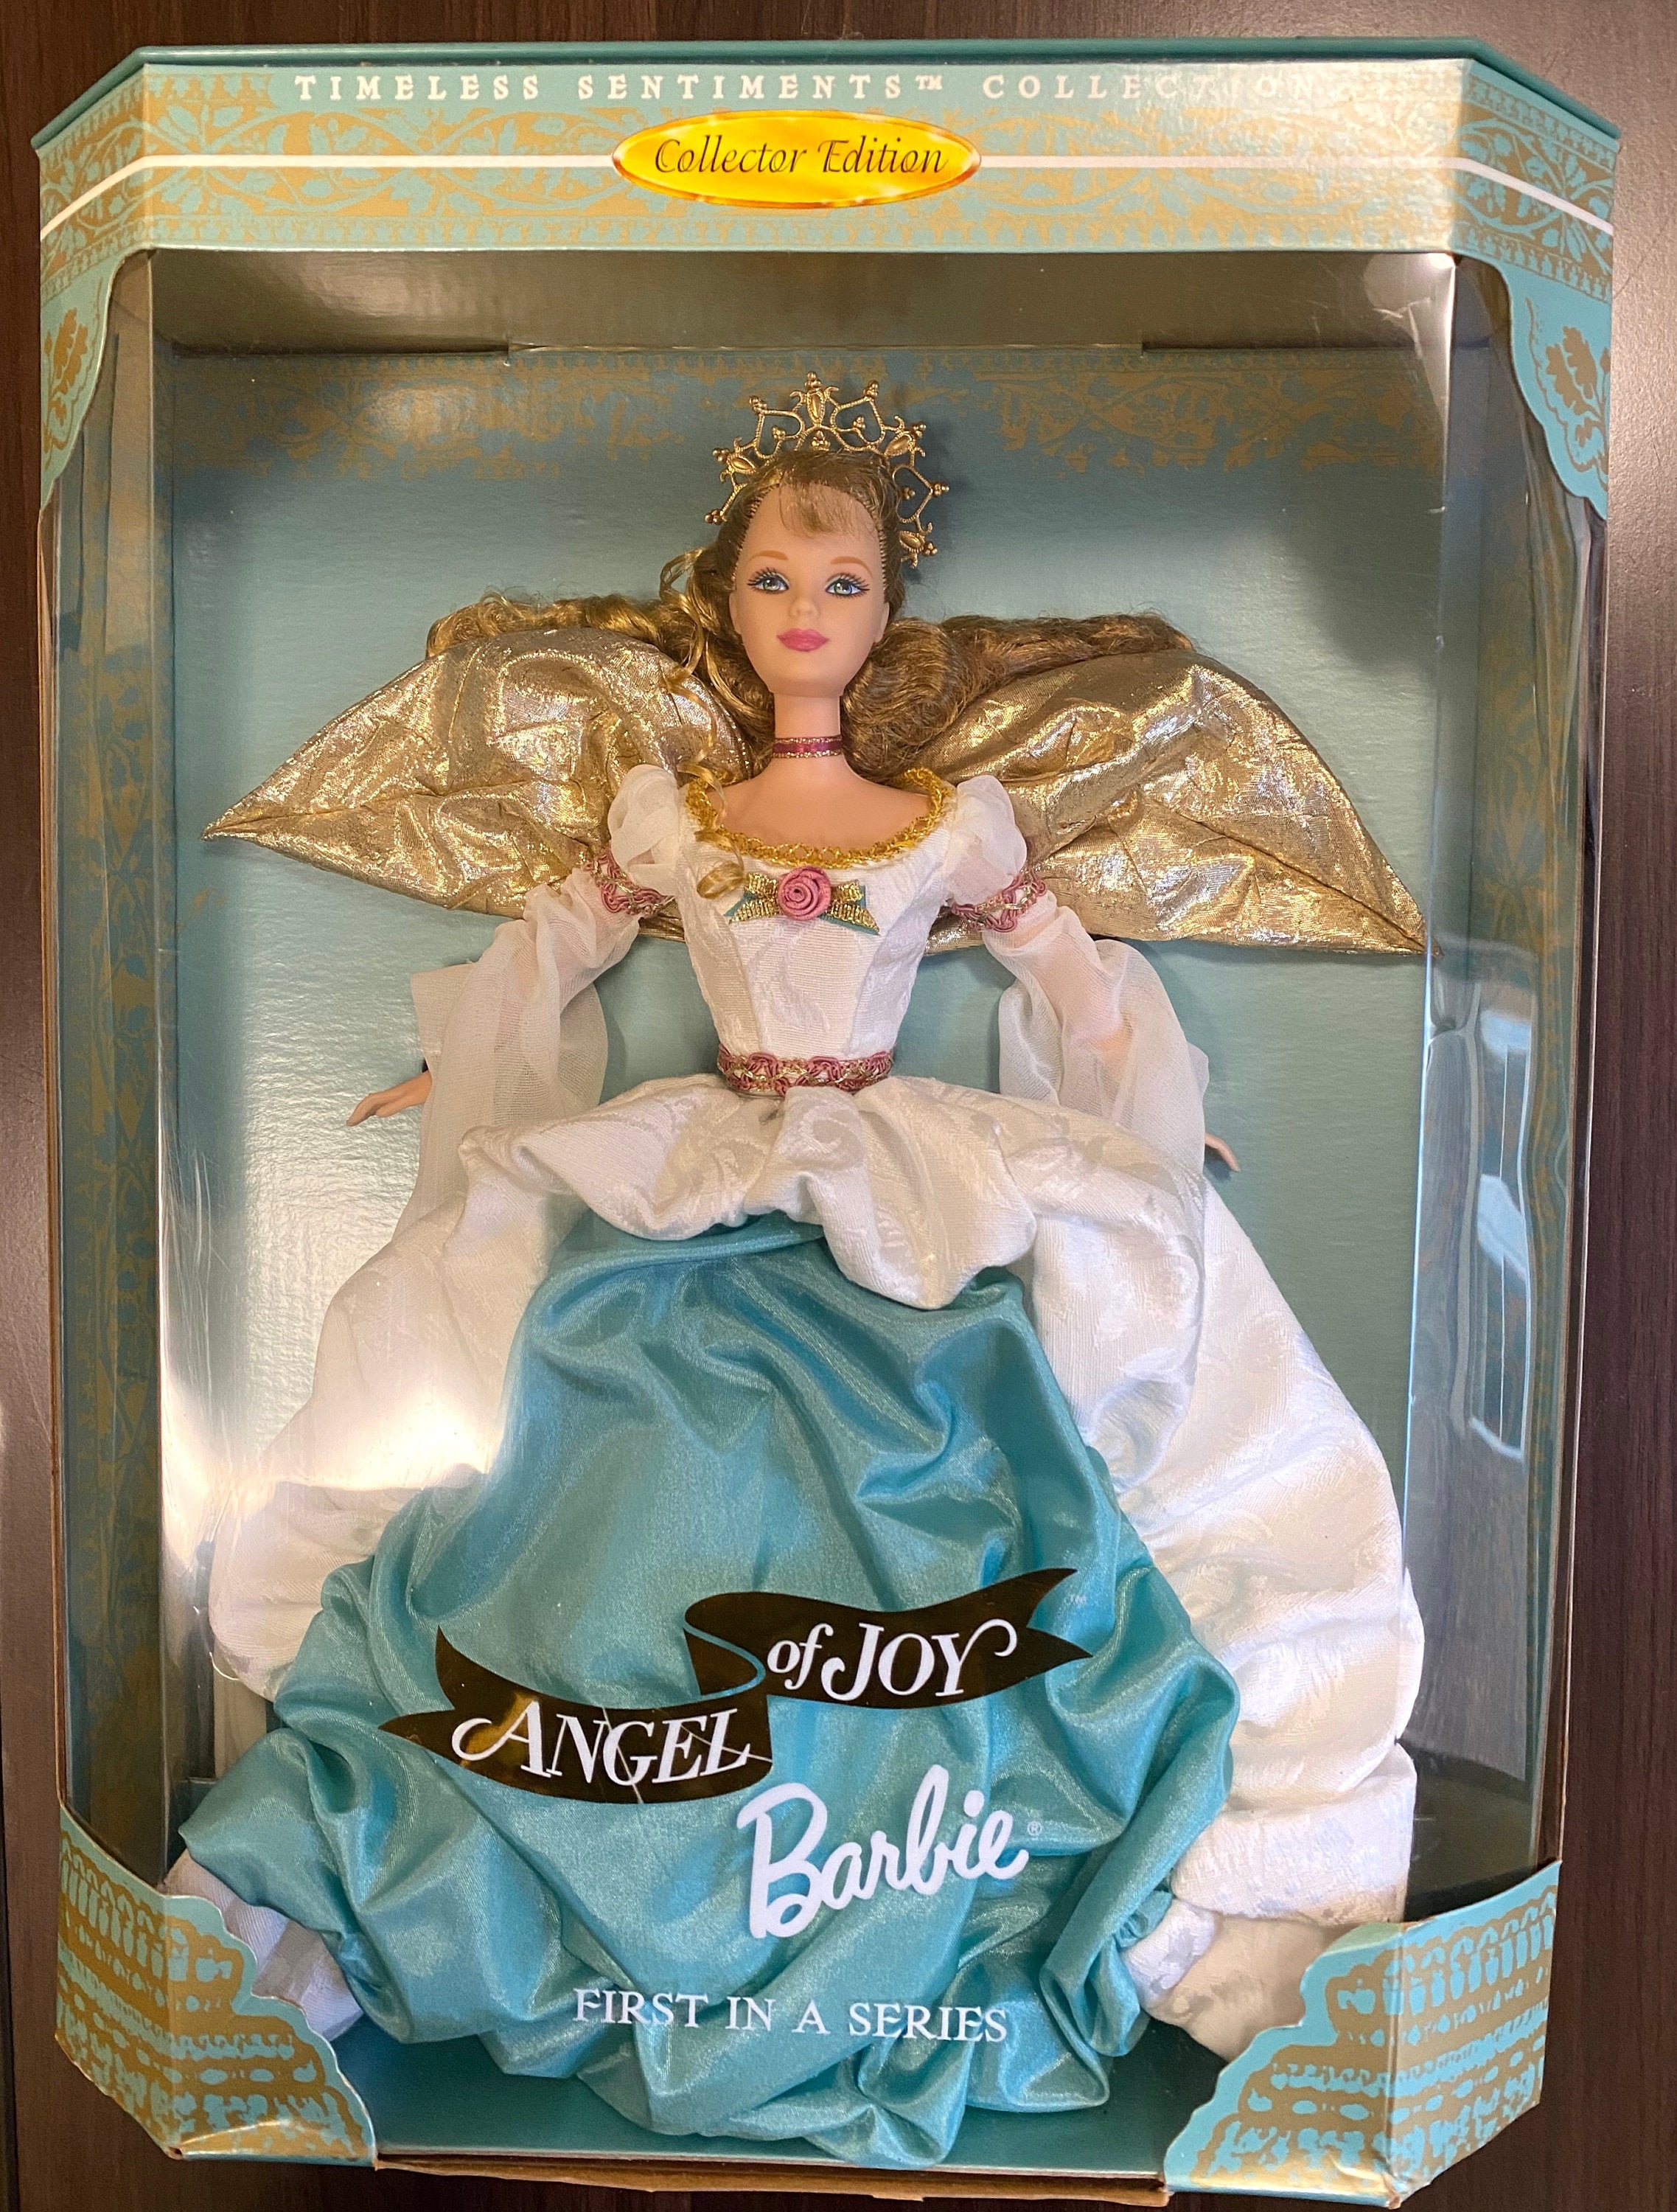 Vintage Angel of Joy Barbie Doll 1998 Timeless Sentiments Collection -   Norway